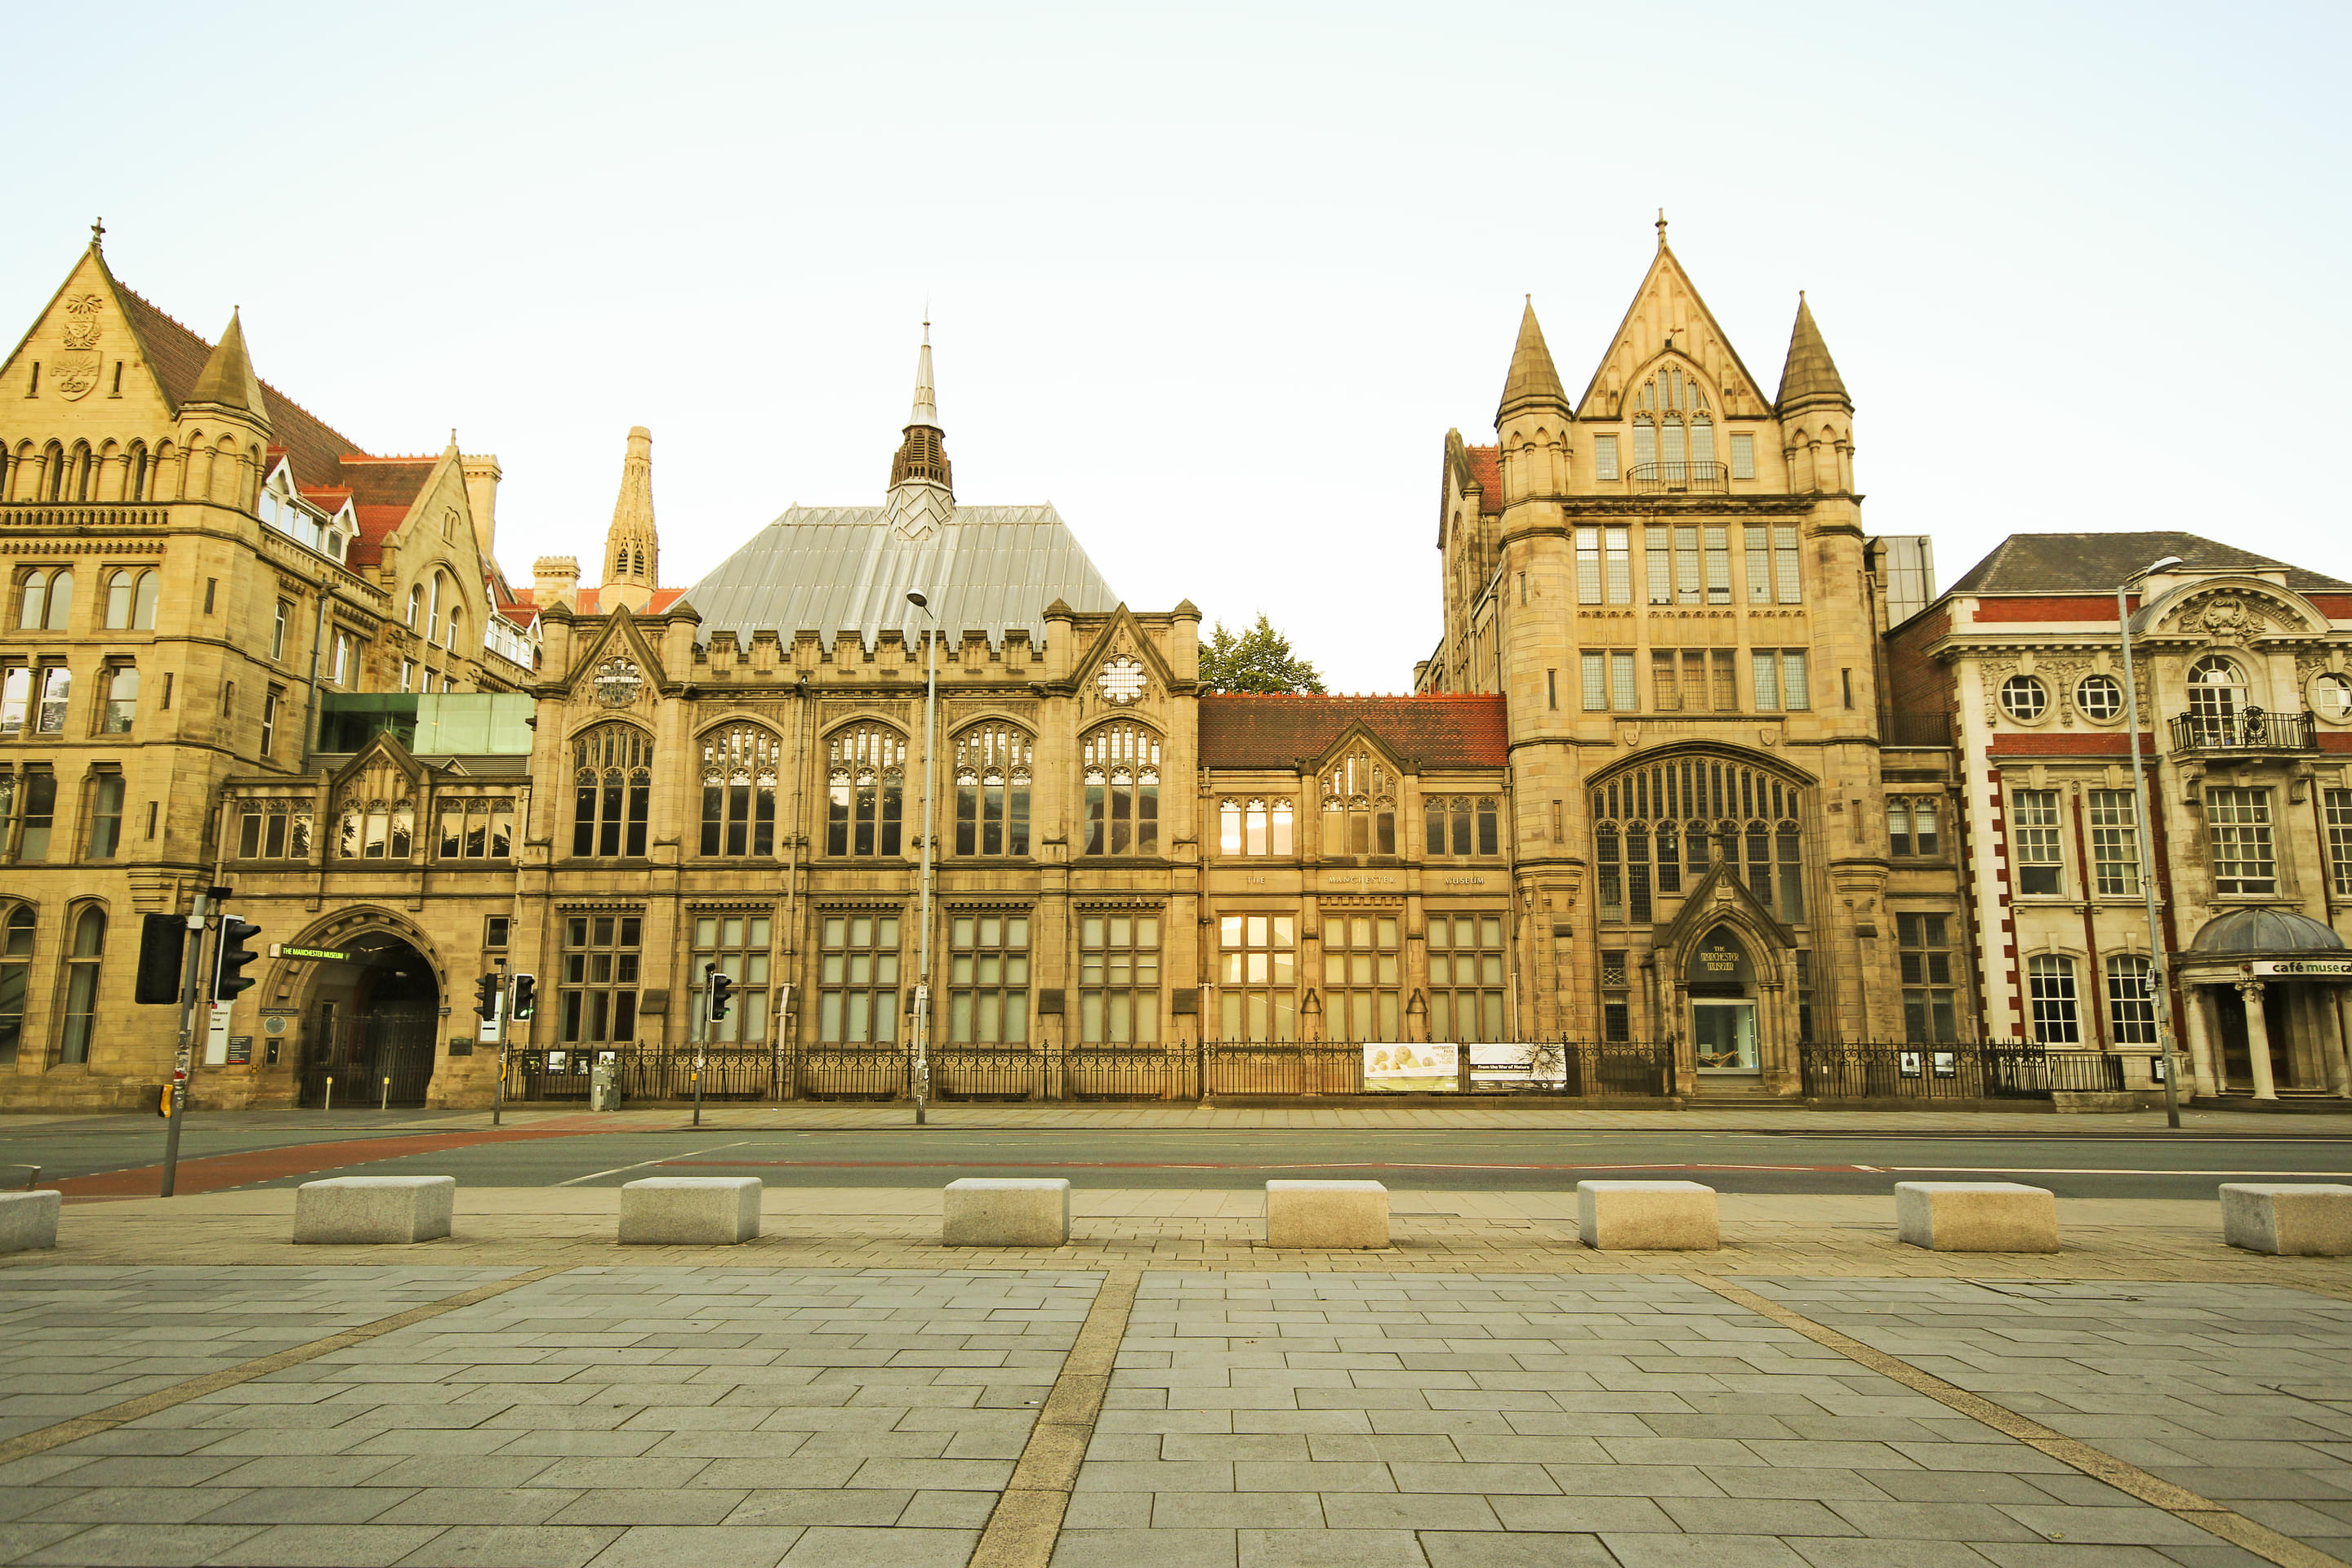 Manchester Museum Overview